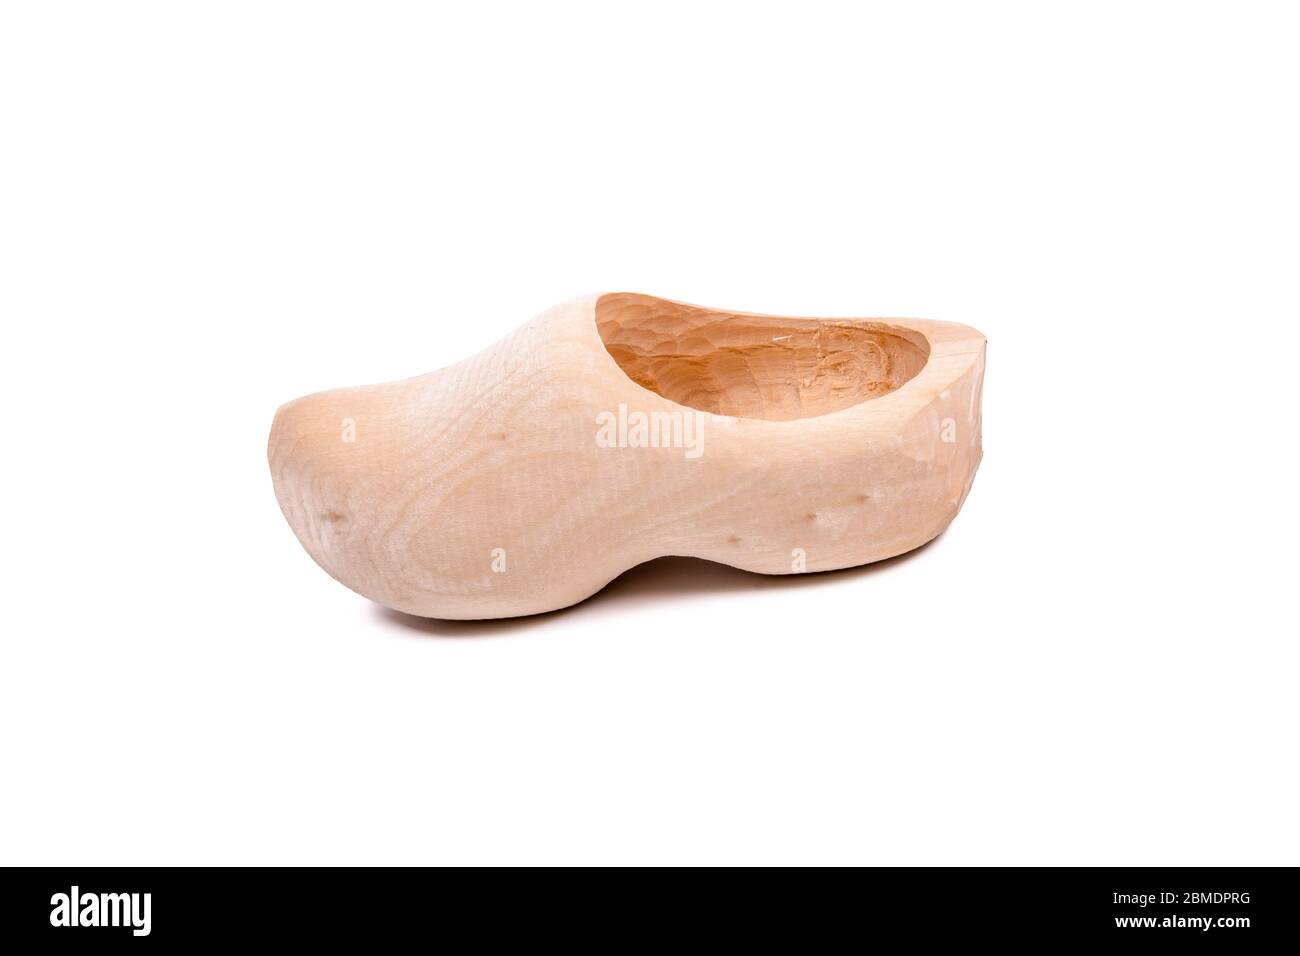 traditional wooden shoes from the netherlands Stock Photo